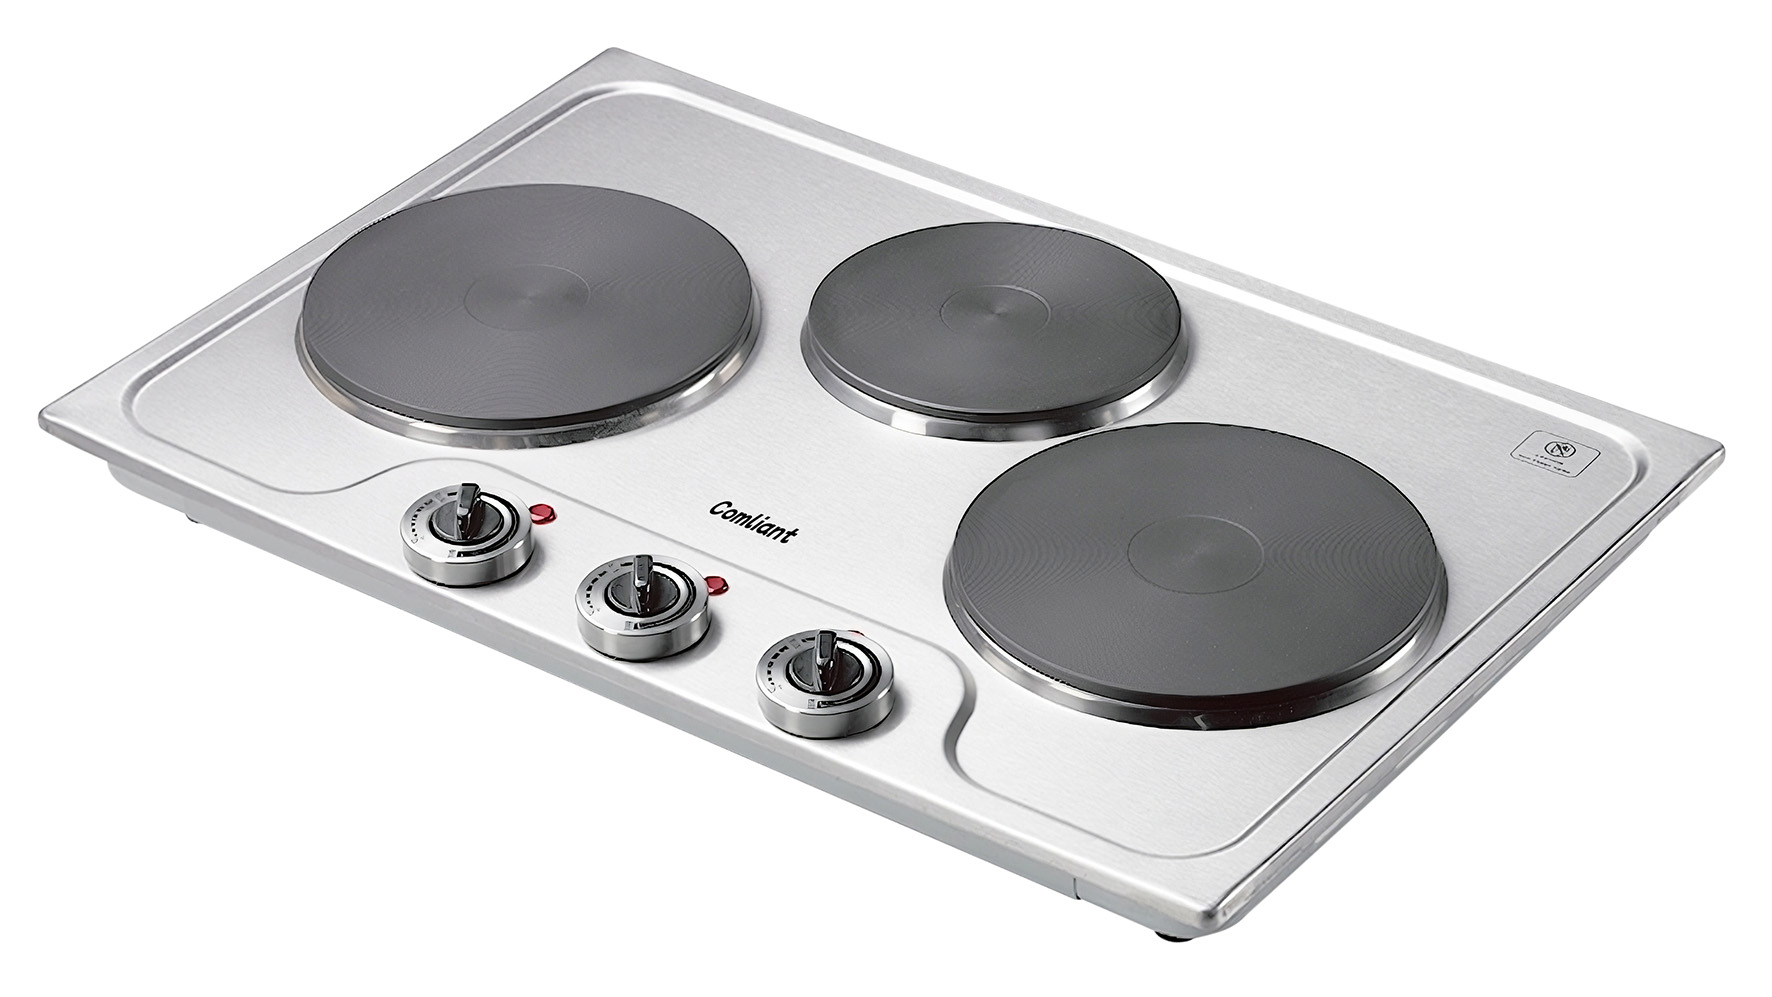 cooker hot plate manufacturing company